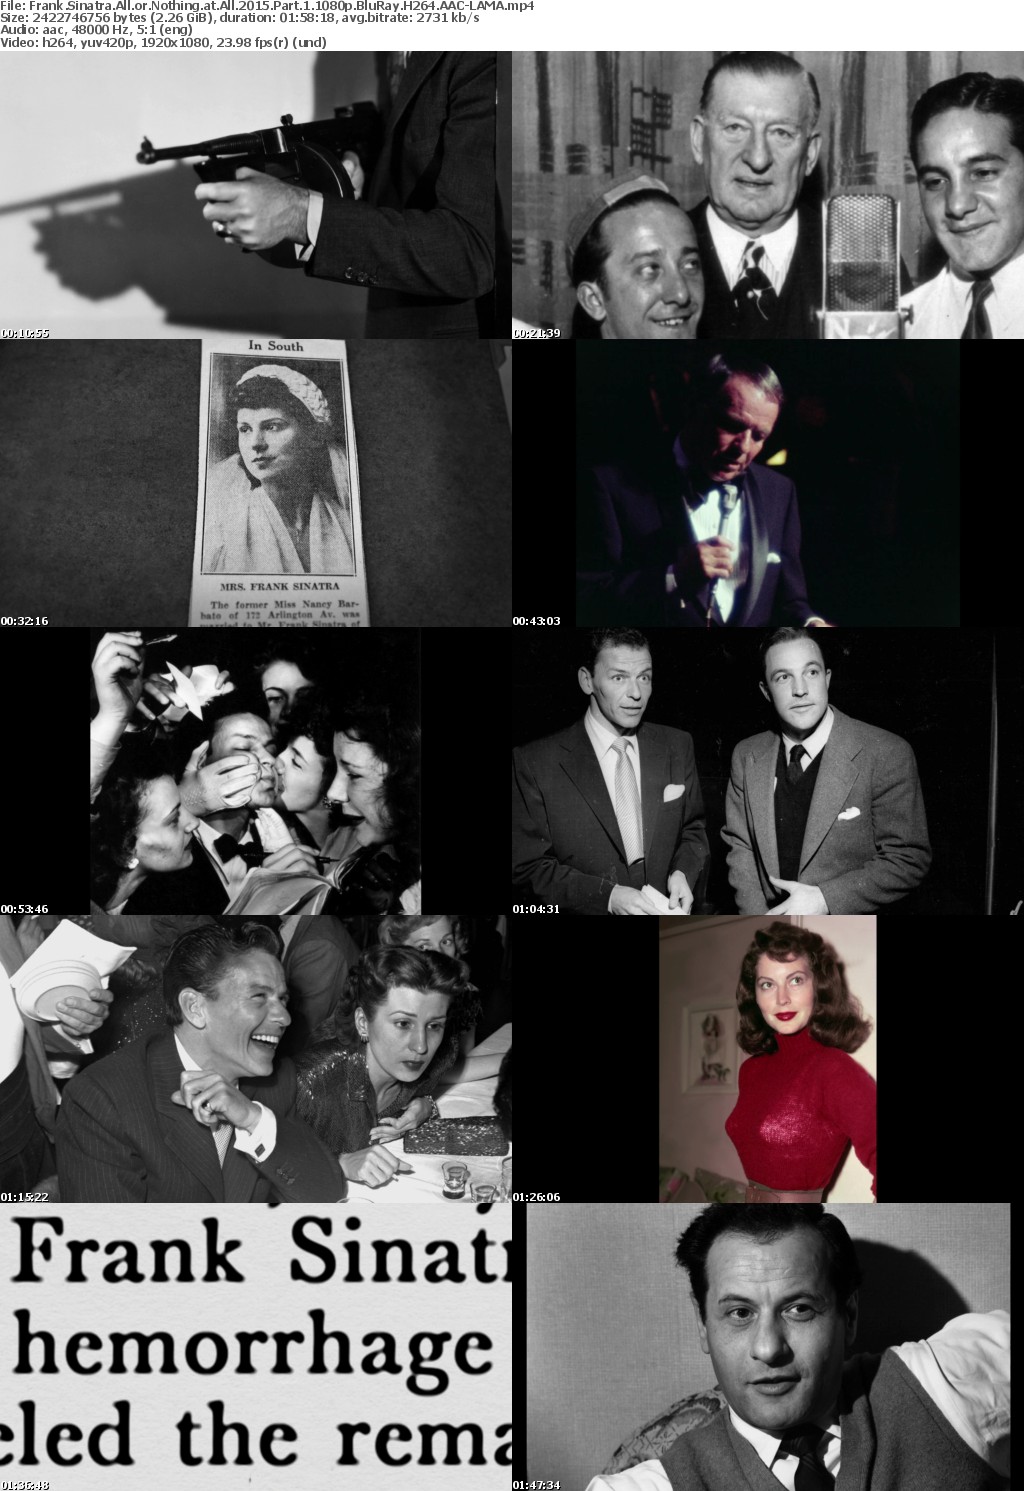 Frank Sinatra All or Nothing at All 2015 Part 1 1080p BluRay H264 AAC-RARBG